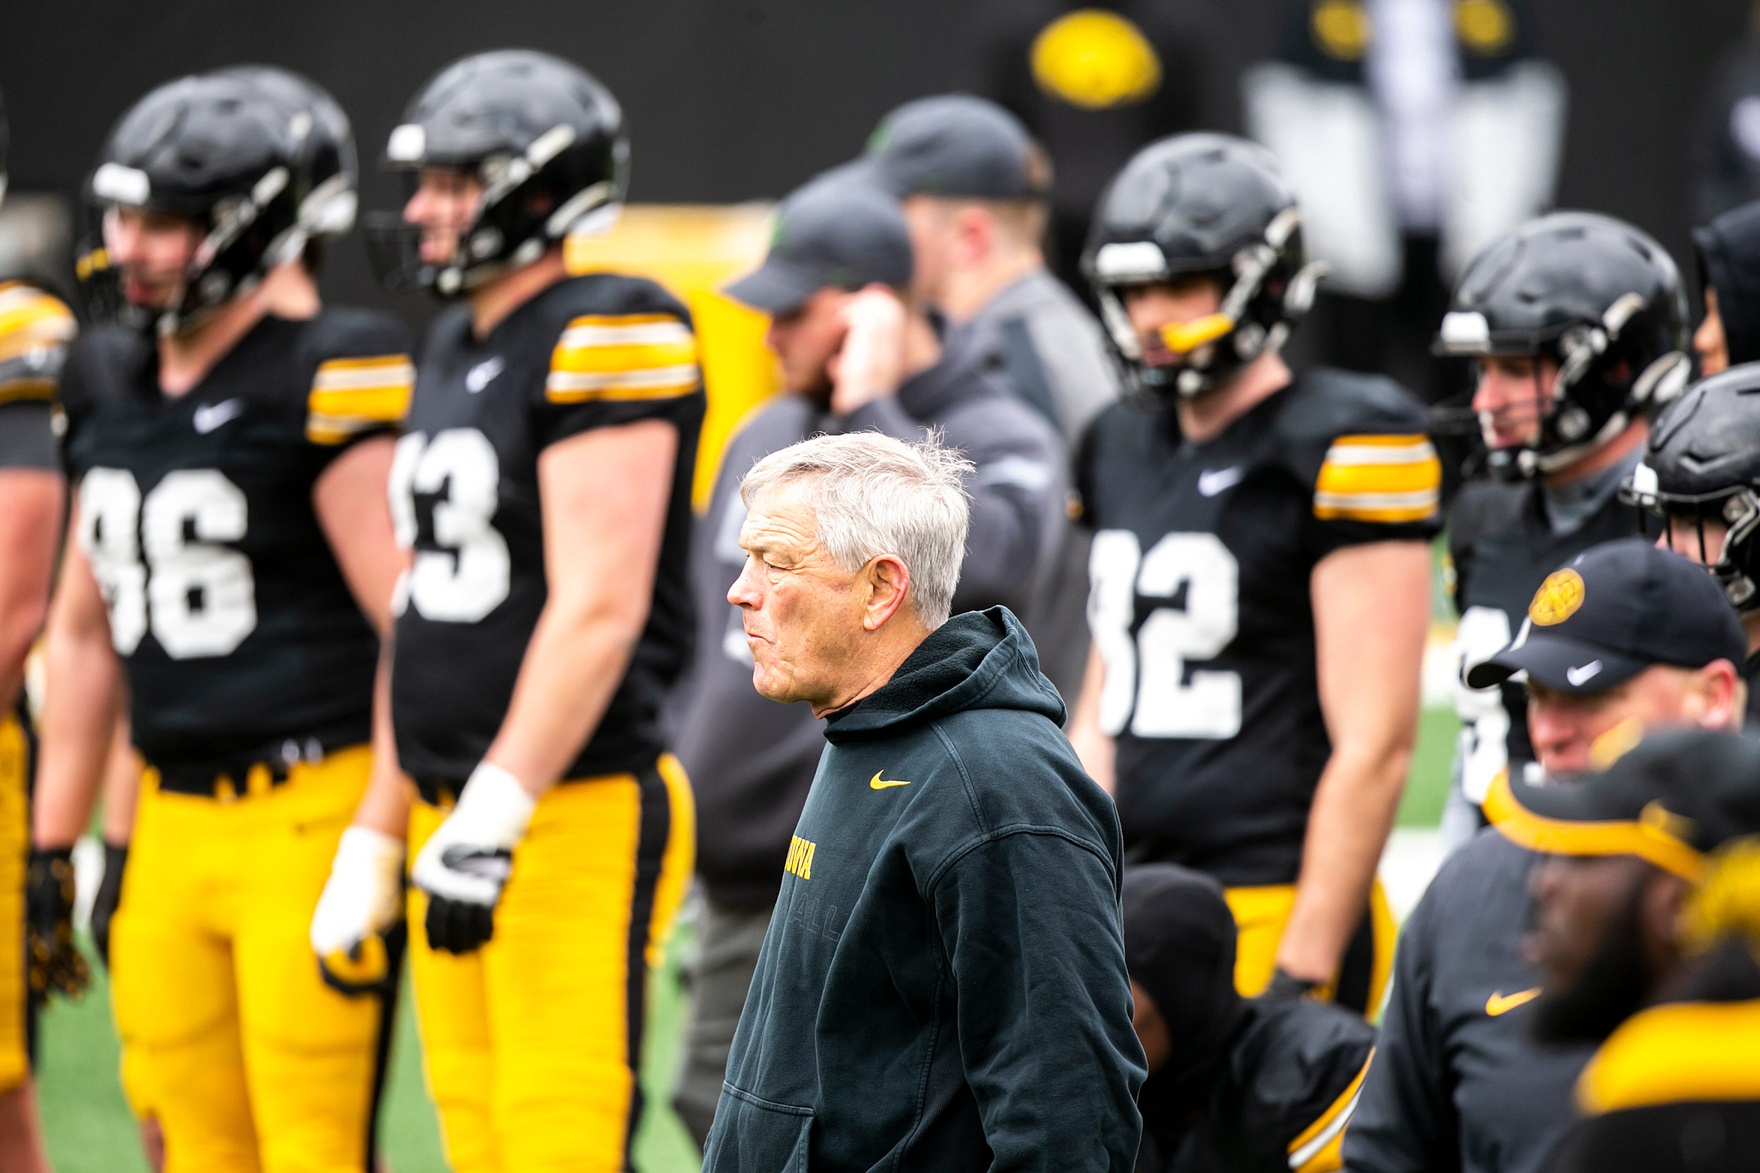 With the Spring Transfer Portal window winding down, these are some names to watch for Iowa to target at wide receiver.